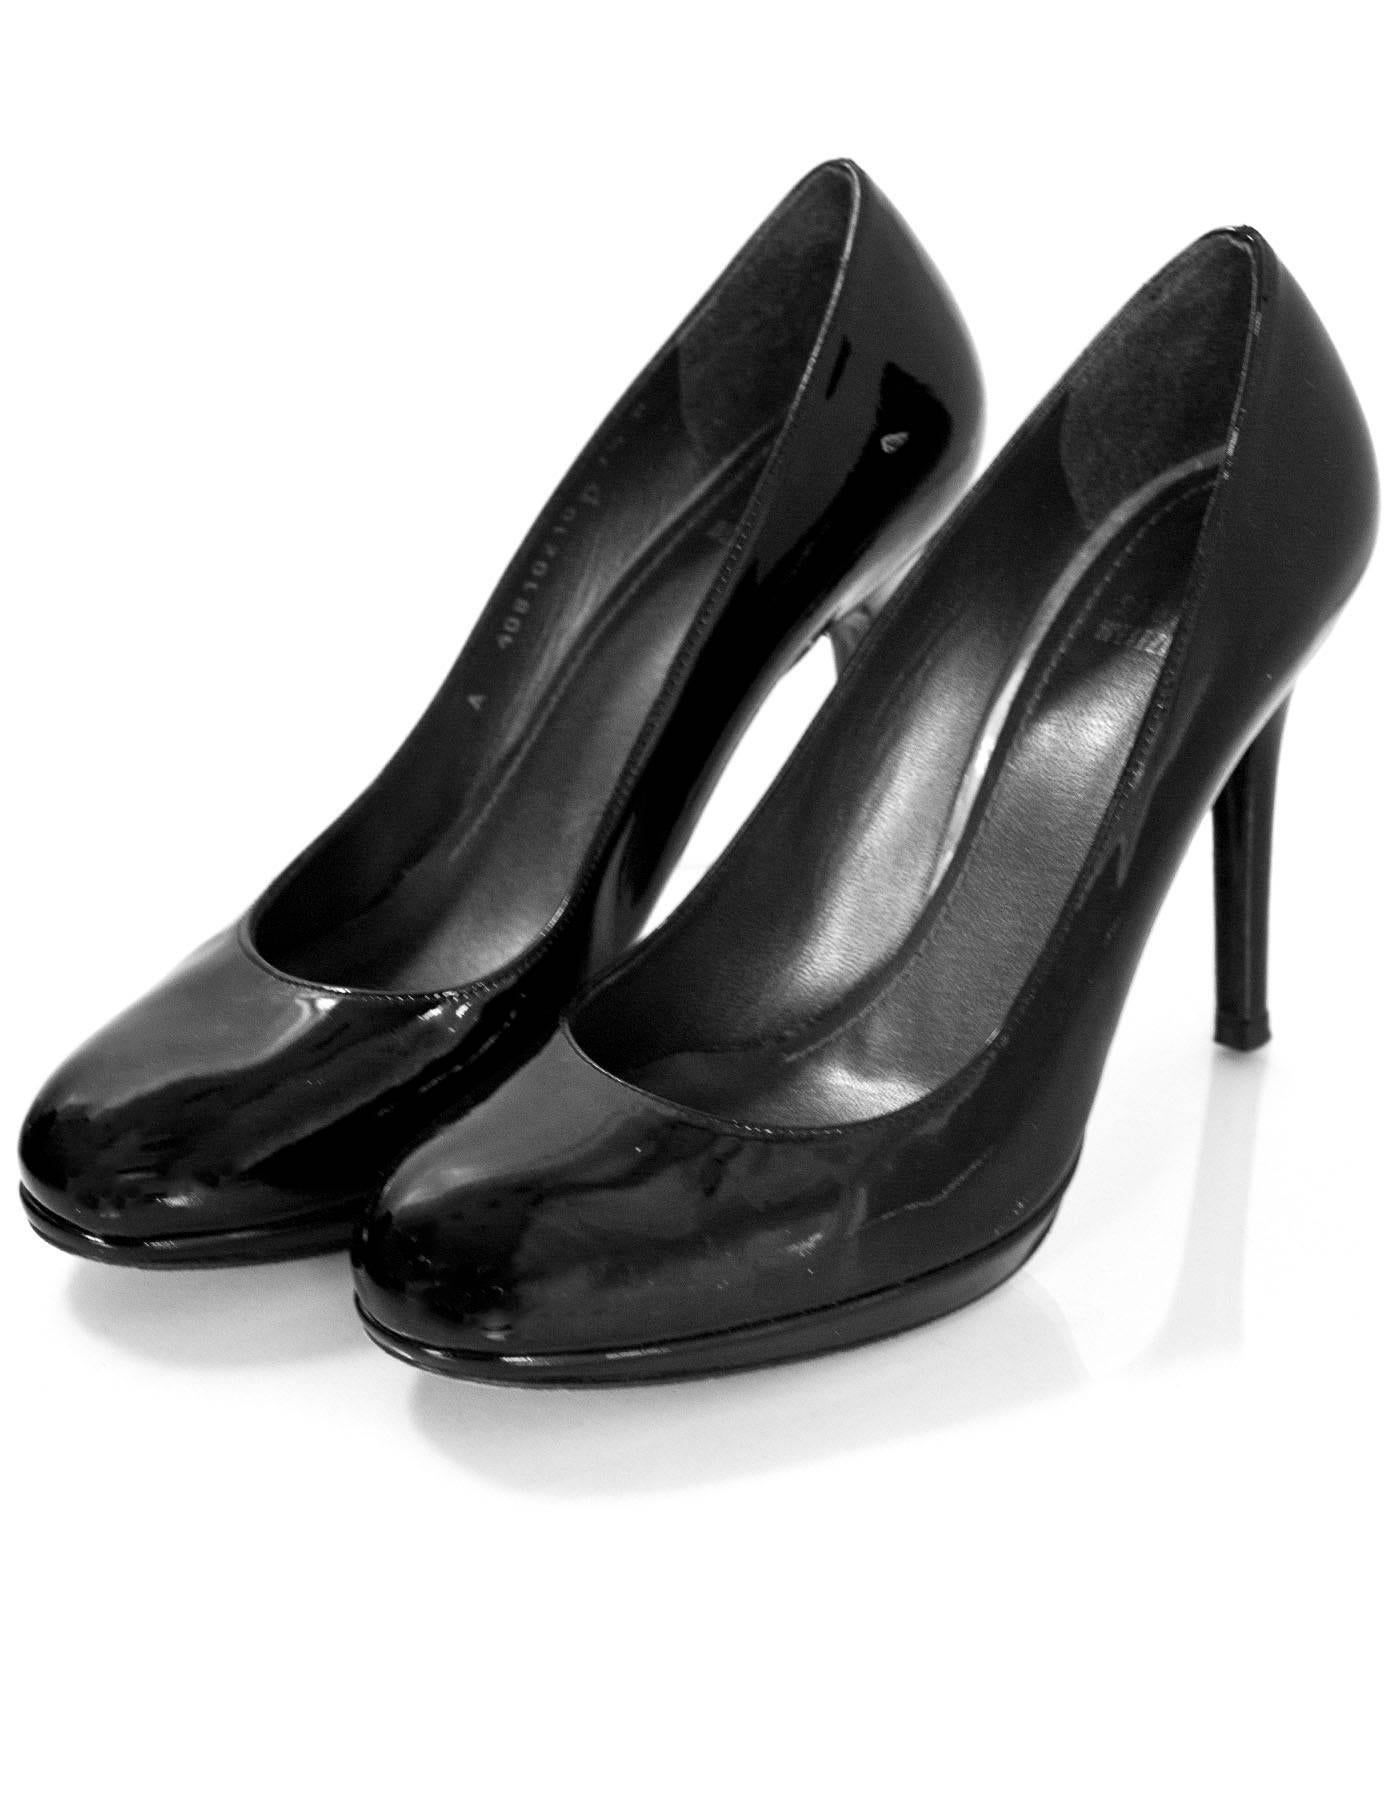 Stuart Weitzman Black Patent Pumps Sz 7.5D

Made In: Spain
Color: Black
Materials: Patent leather
Closure/Opening: Slide on
Sole Stamp: Stuart Weitzman Leather Sole Made In Spain
Overall Condition: Excellent pre-owned condition with the exception of